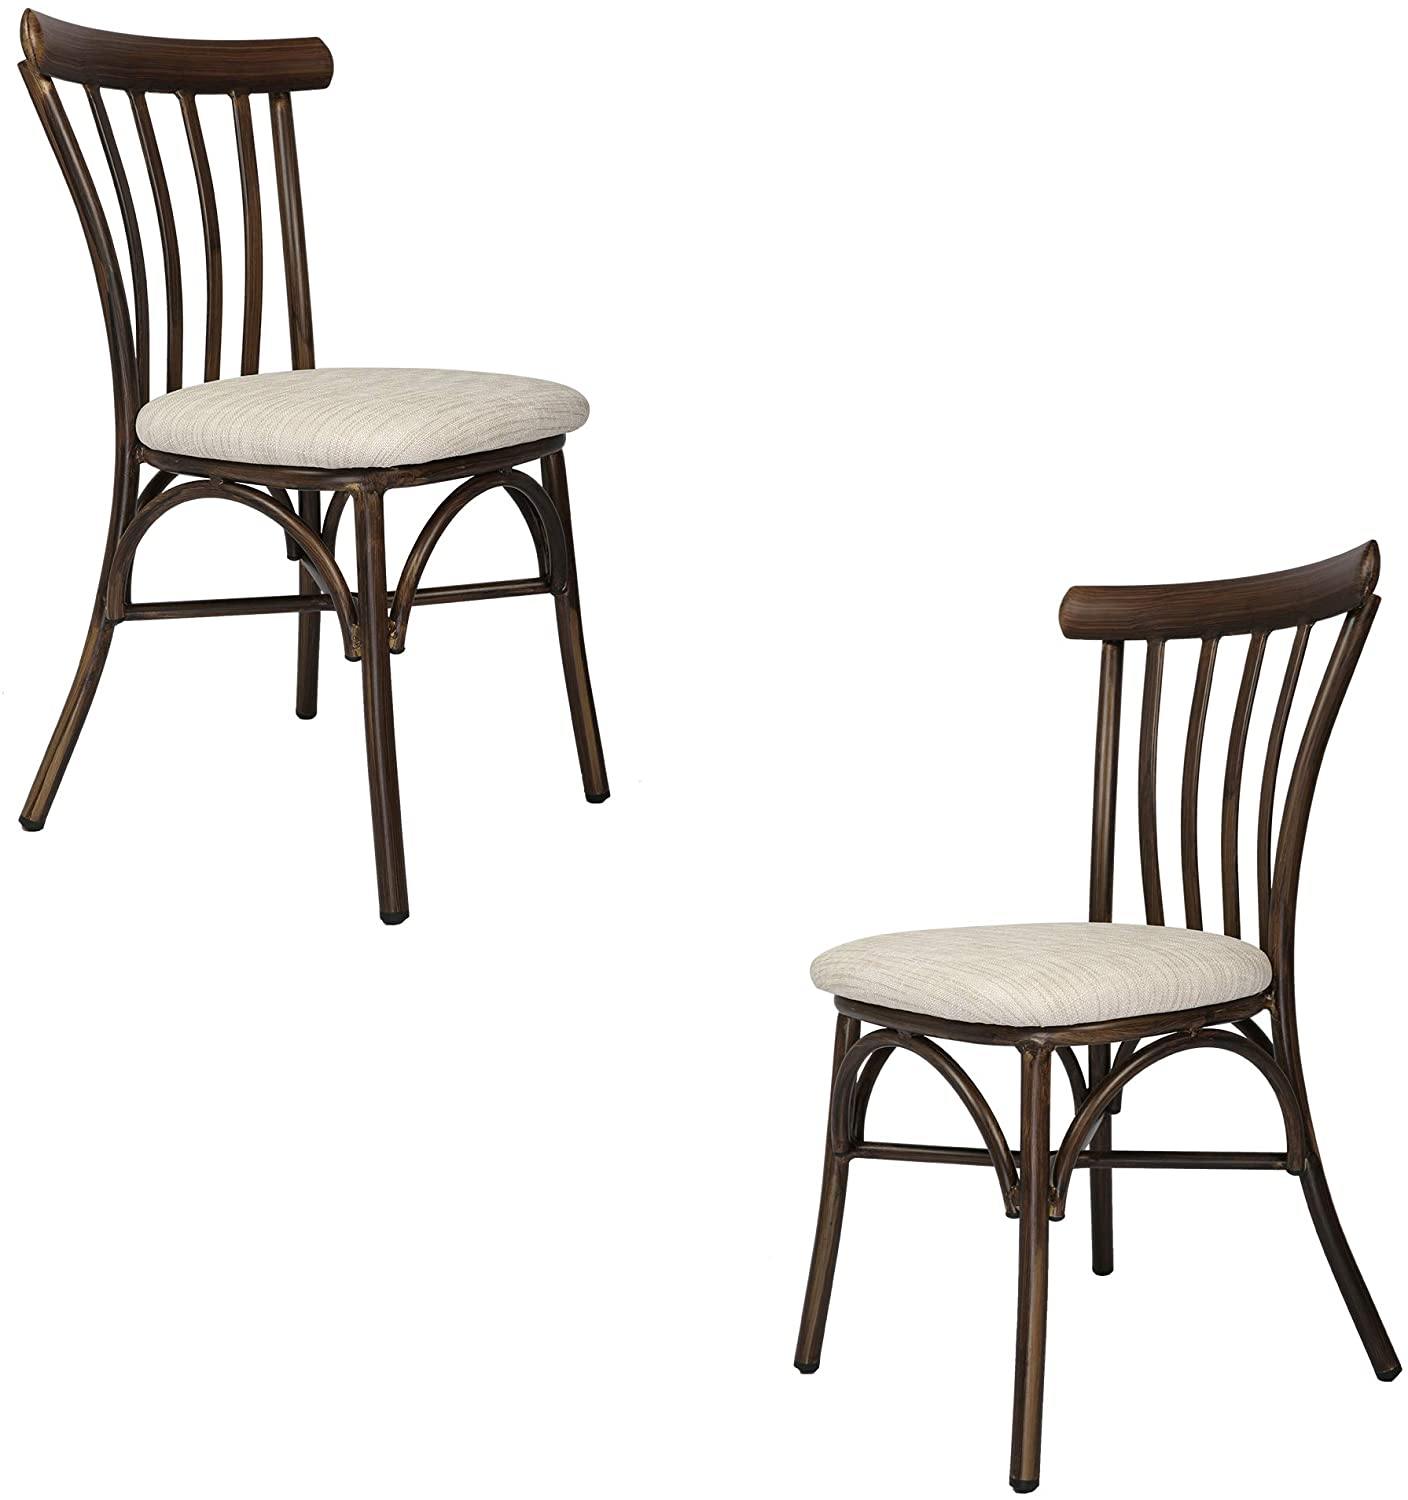 2 PCs Upholstered Dining Chairs Set, Aluminum Frame With Wood Finish, Modern PU Seat Style Suitable For Home And Restaurant Use - Bosonshop